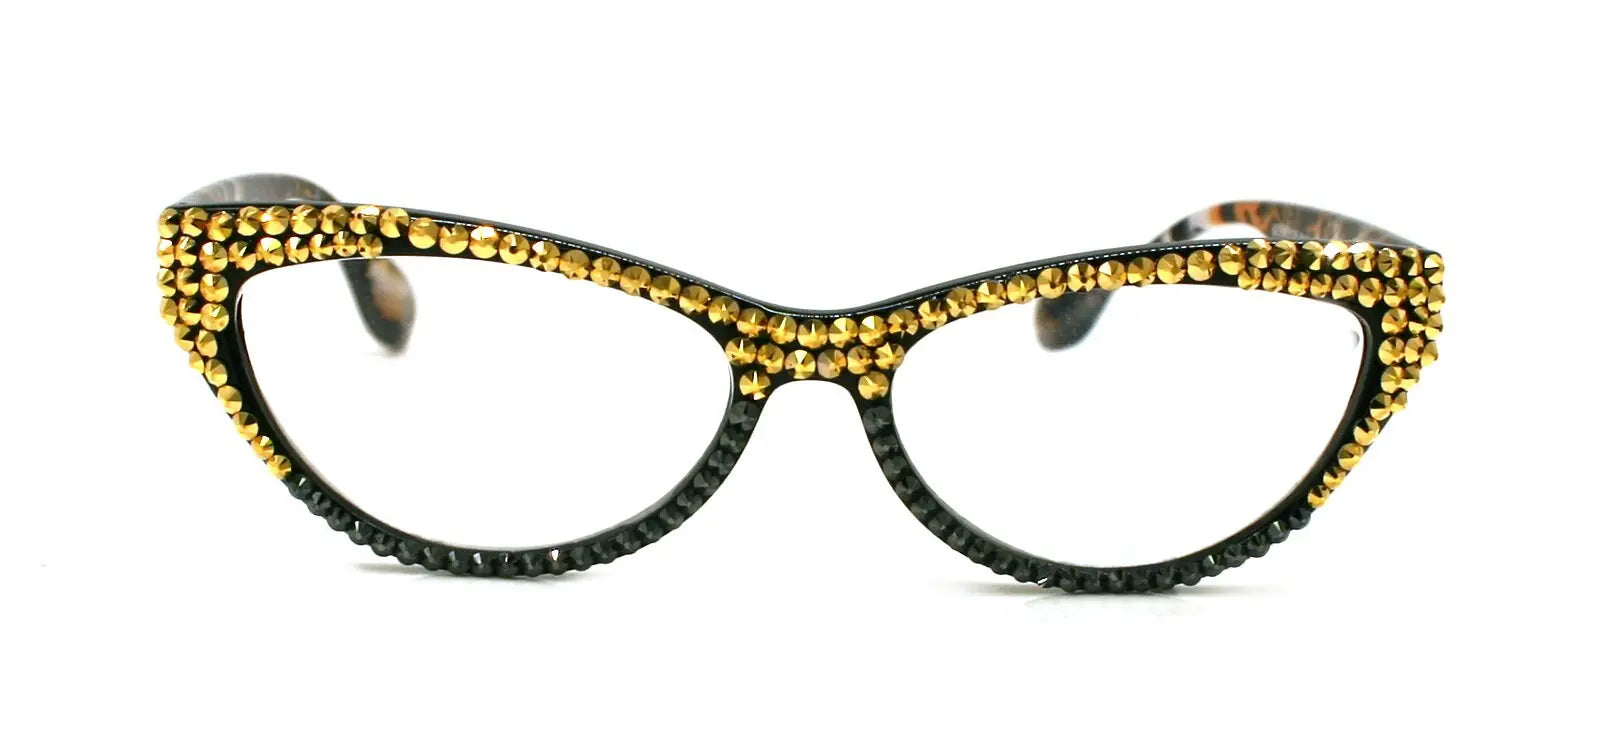 Lynx, (Bling) Women Reading Glasses W (Full TOP) (Golden Shadow) Genuine European Crystals, Cat Eyes Tiger Print +1.50..+3 NY Fifth Avenue